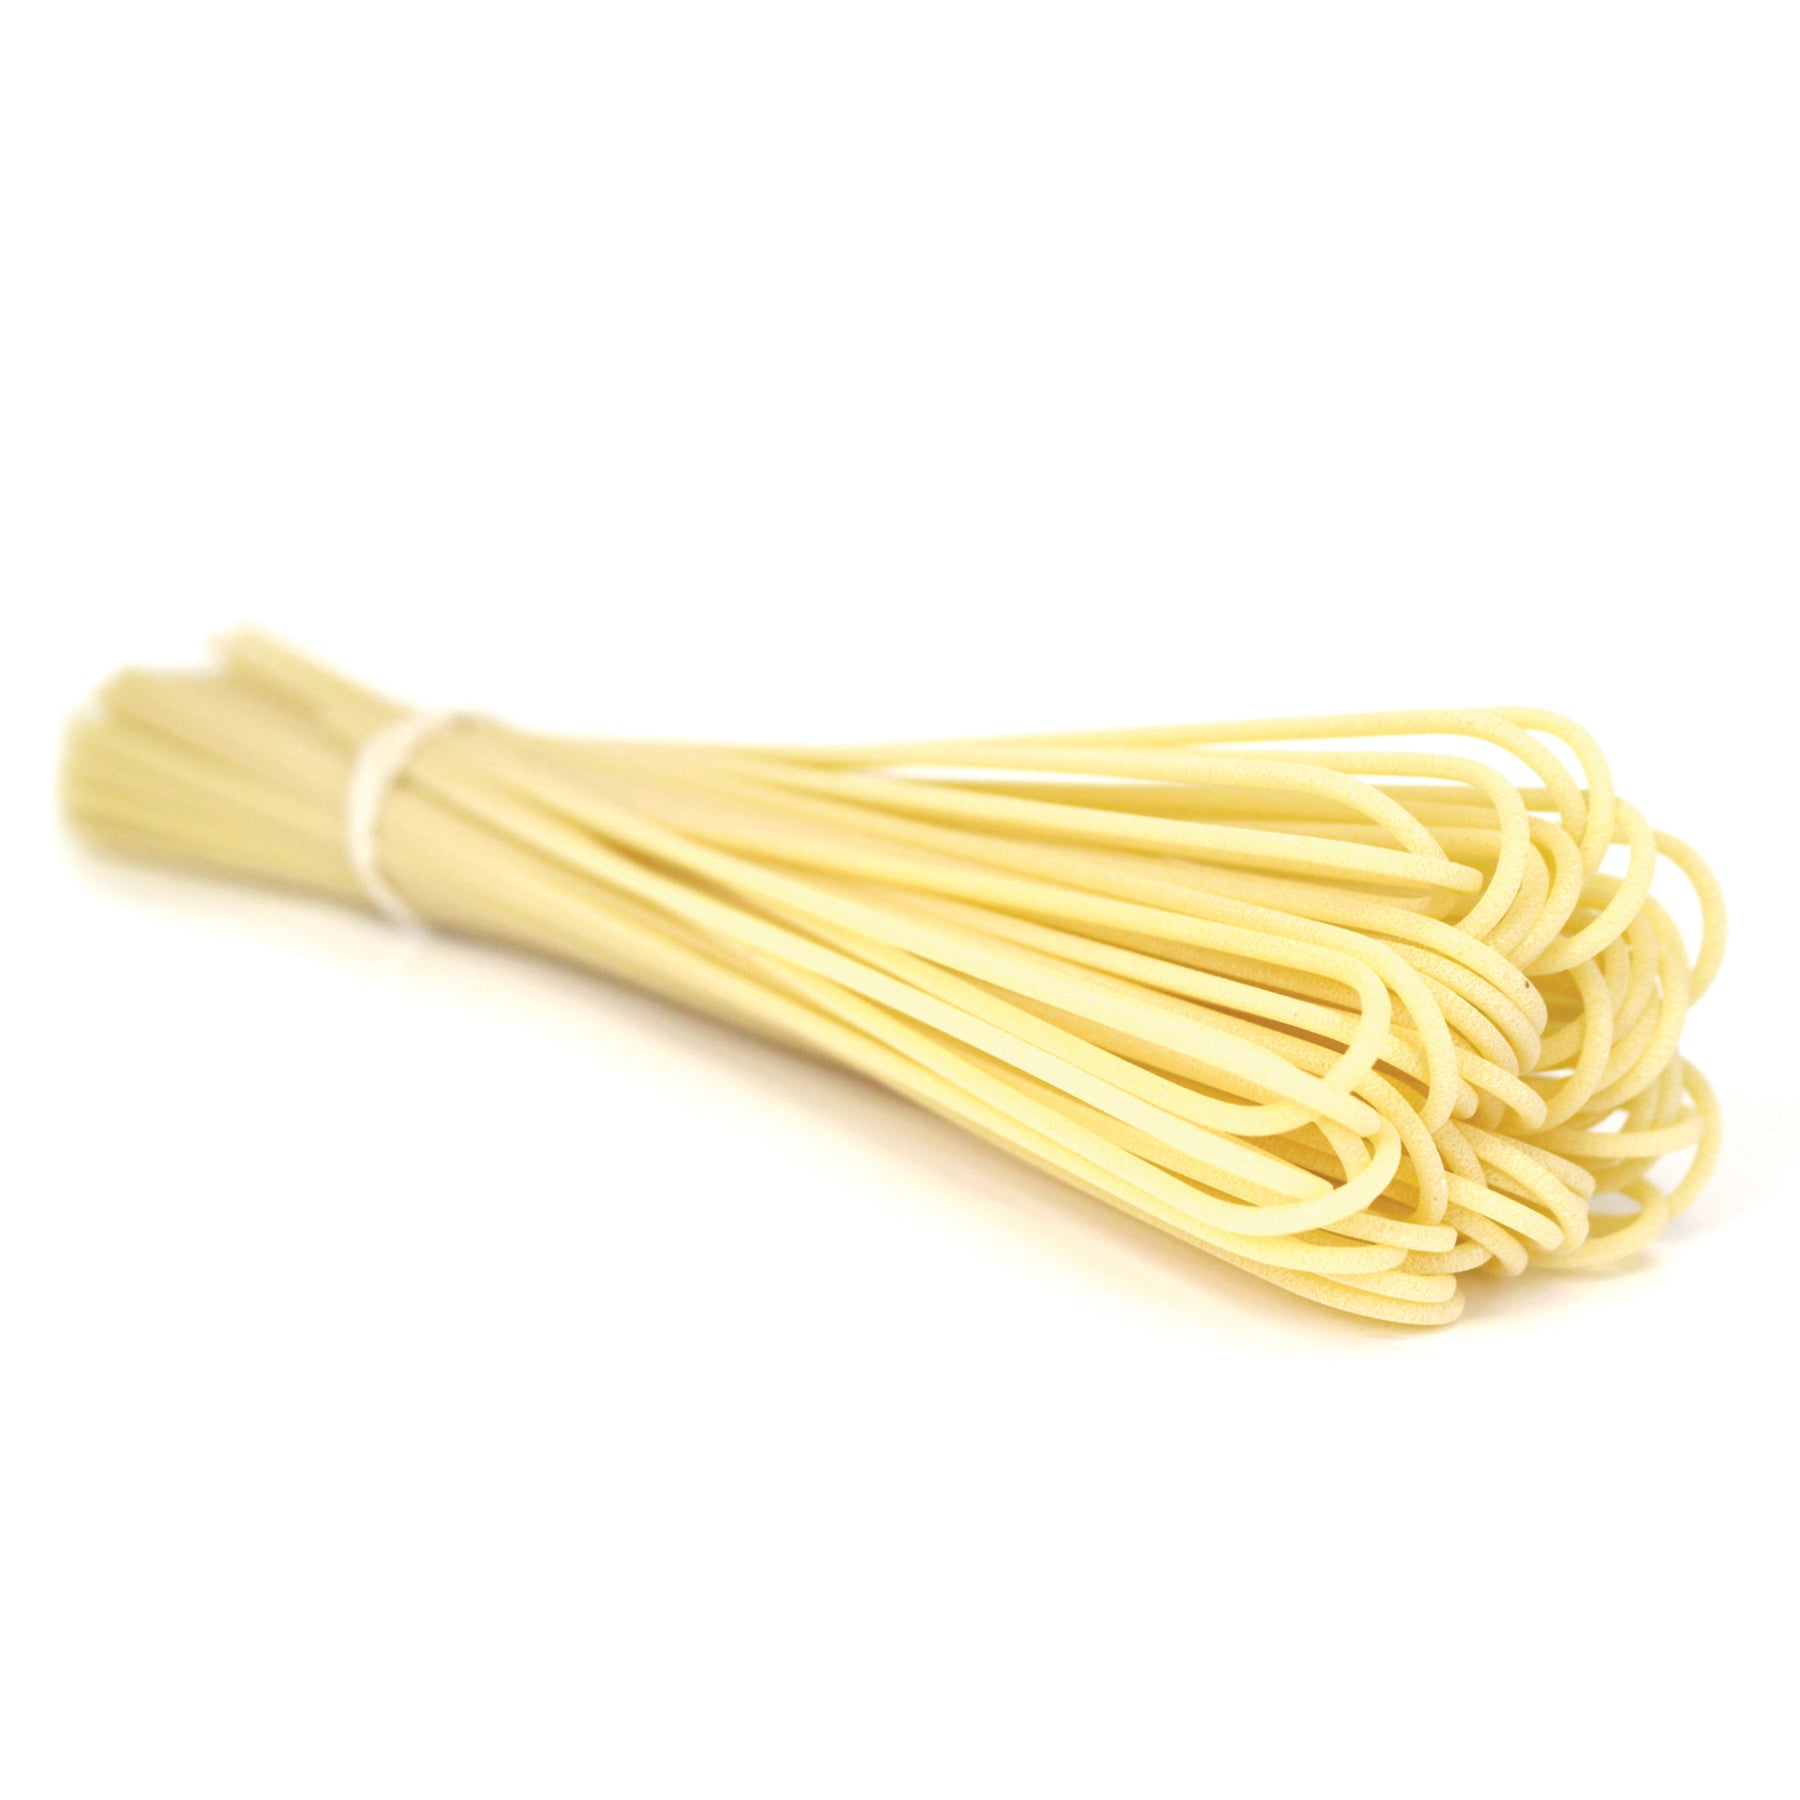 Italian Cooking Store - Guitar for pasta - Italian Cooking Store